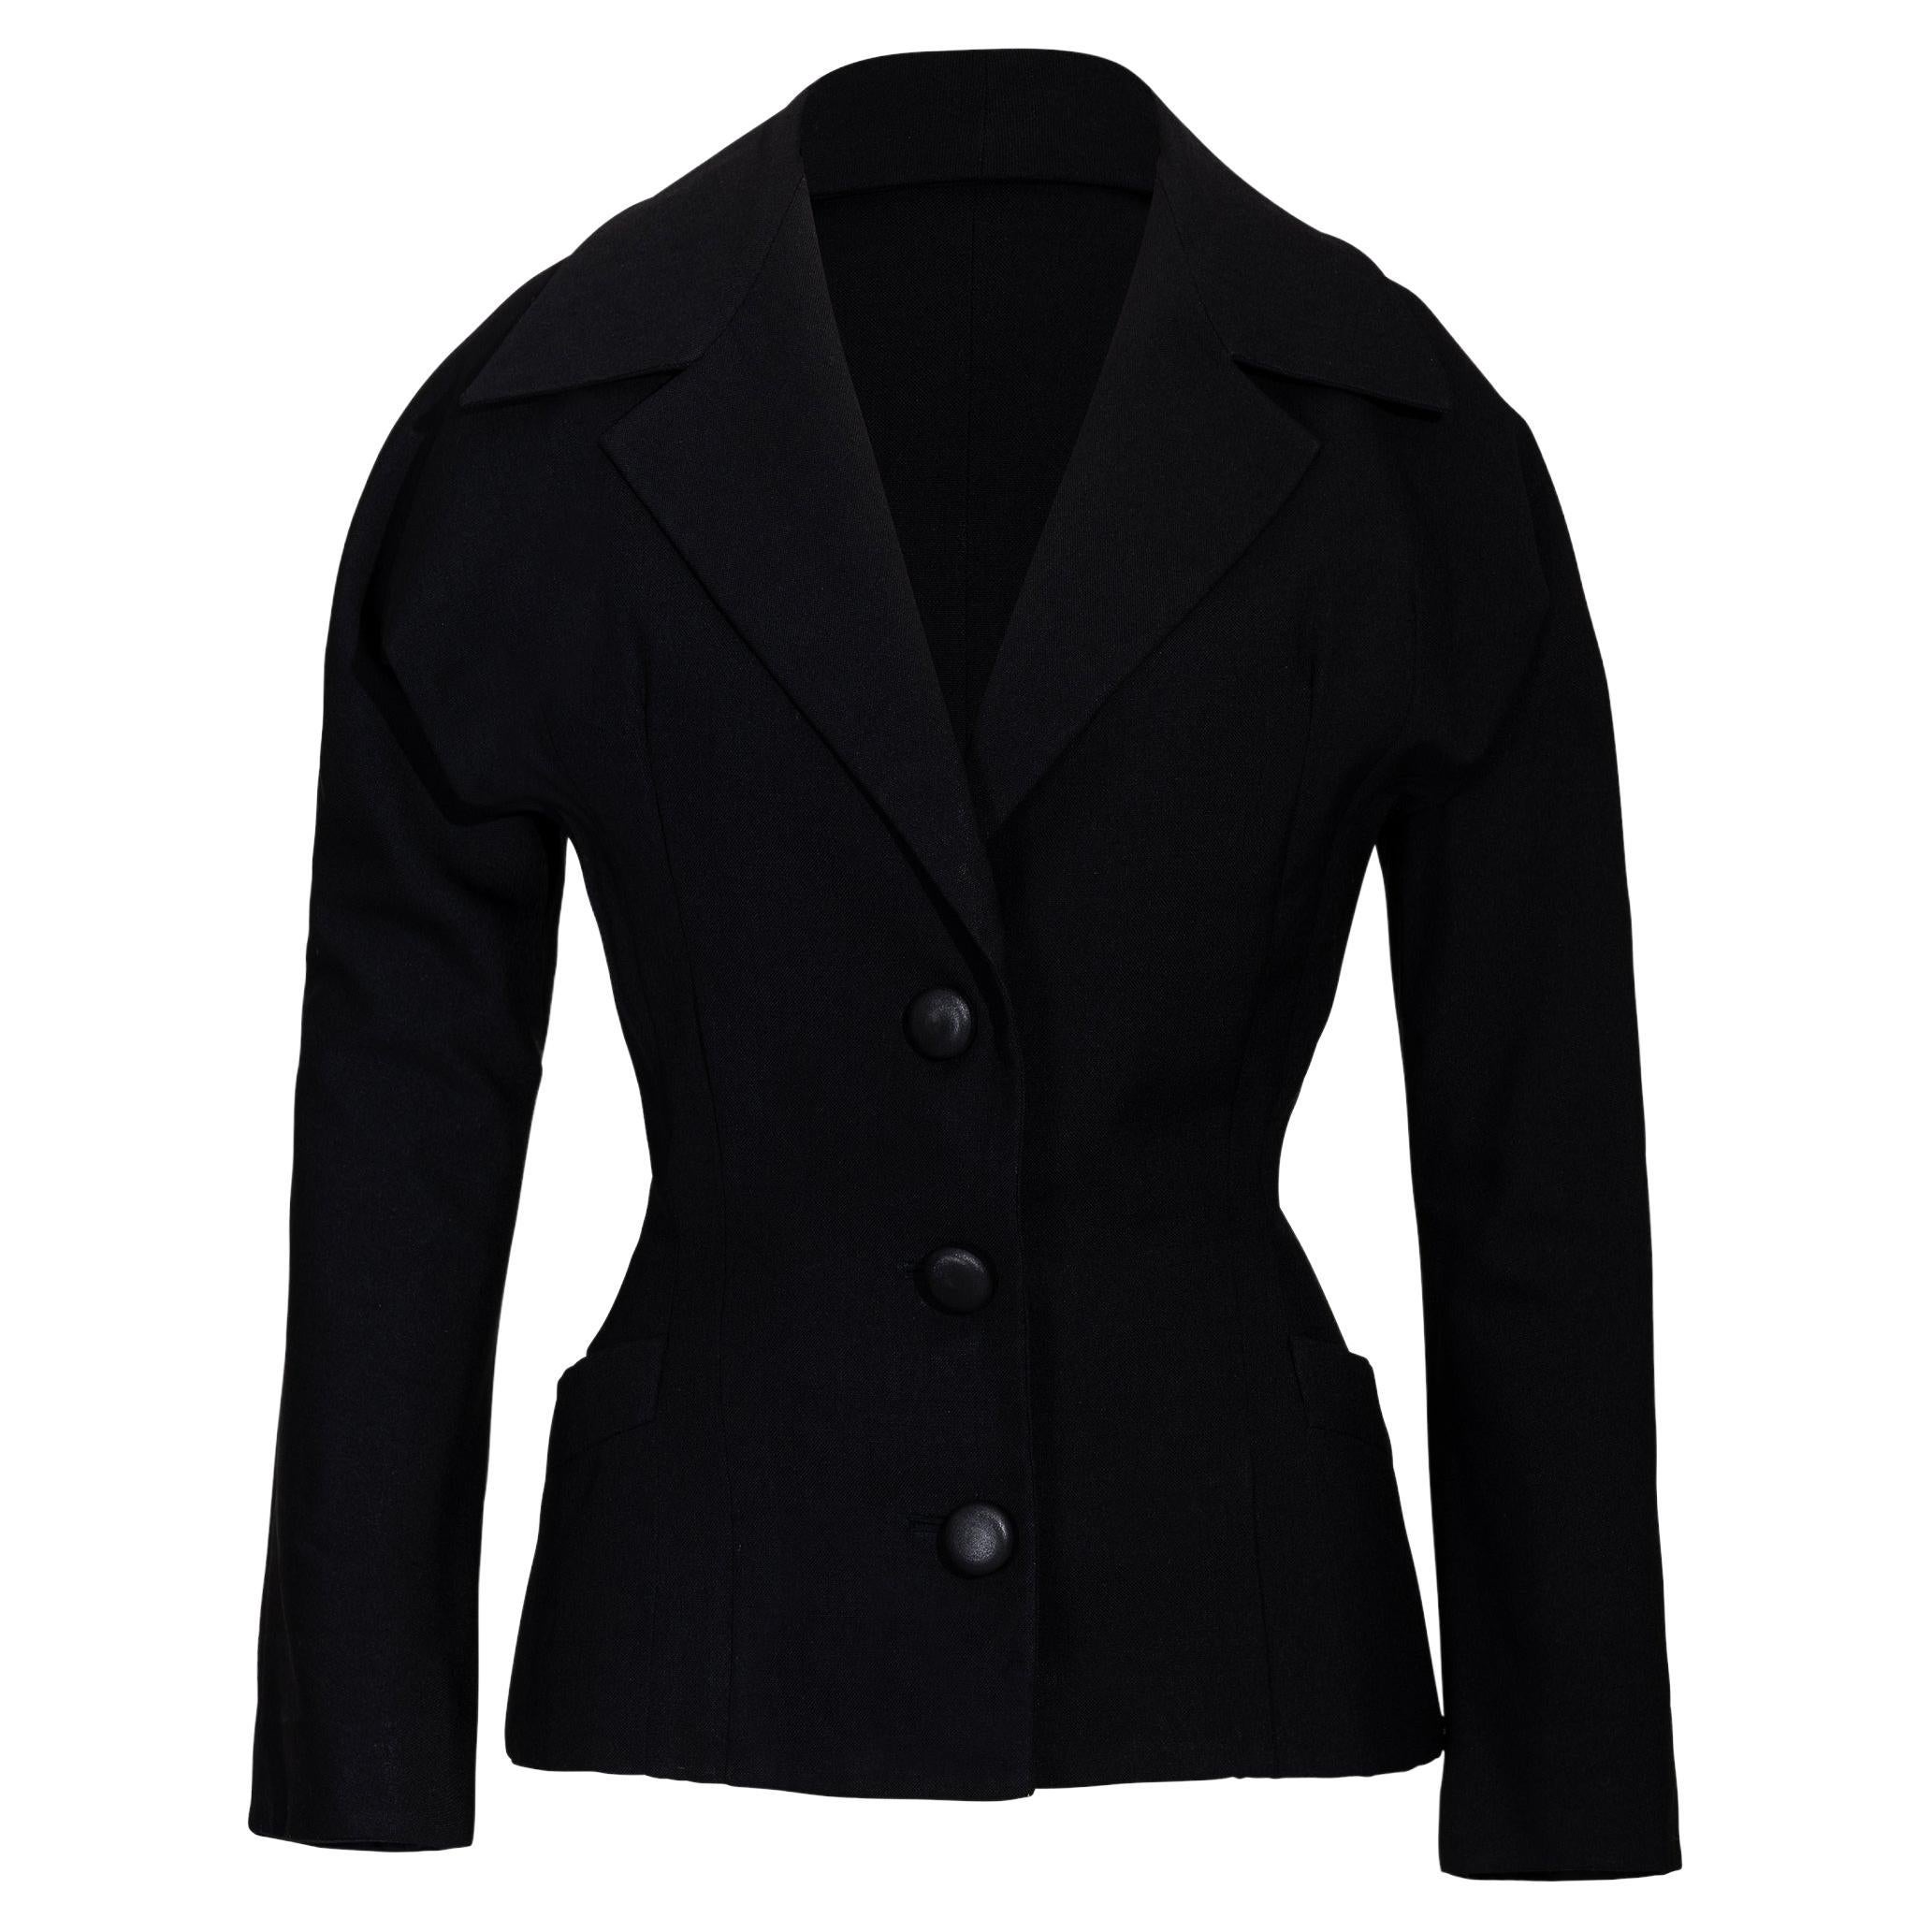 c. 1950 Christian Dior 'New Look' Black Wool Jacket For Sale